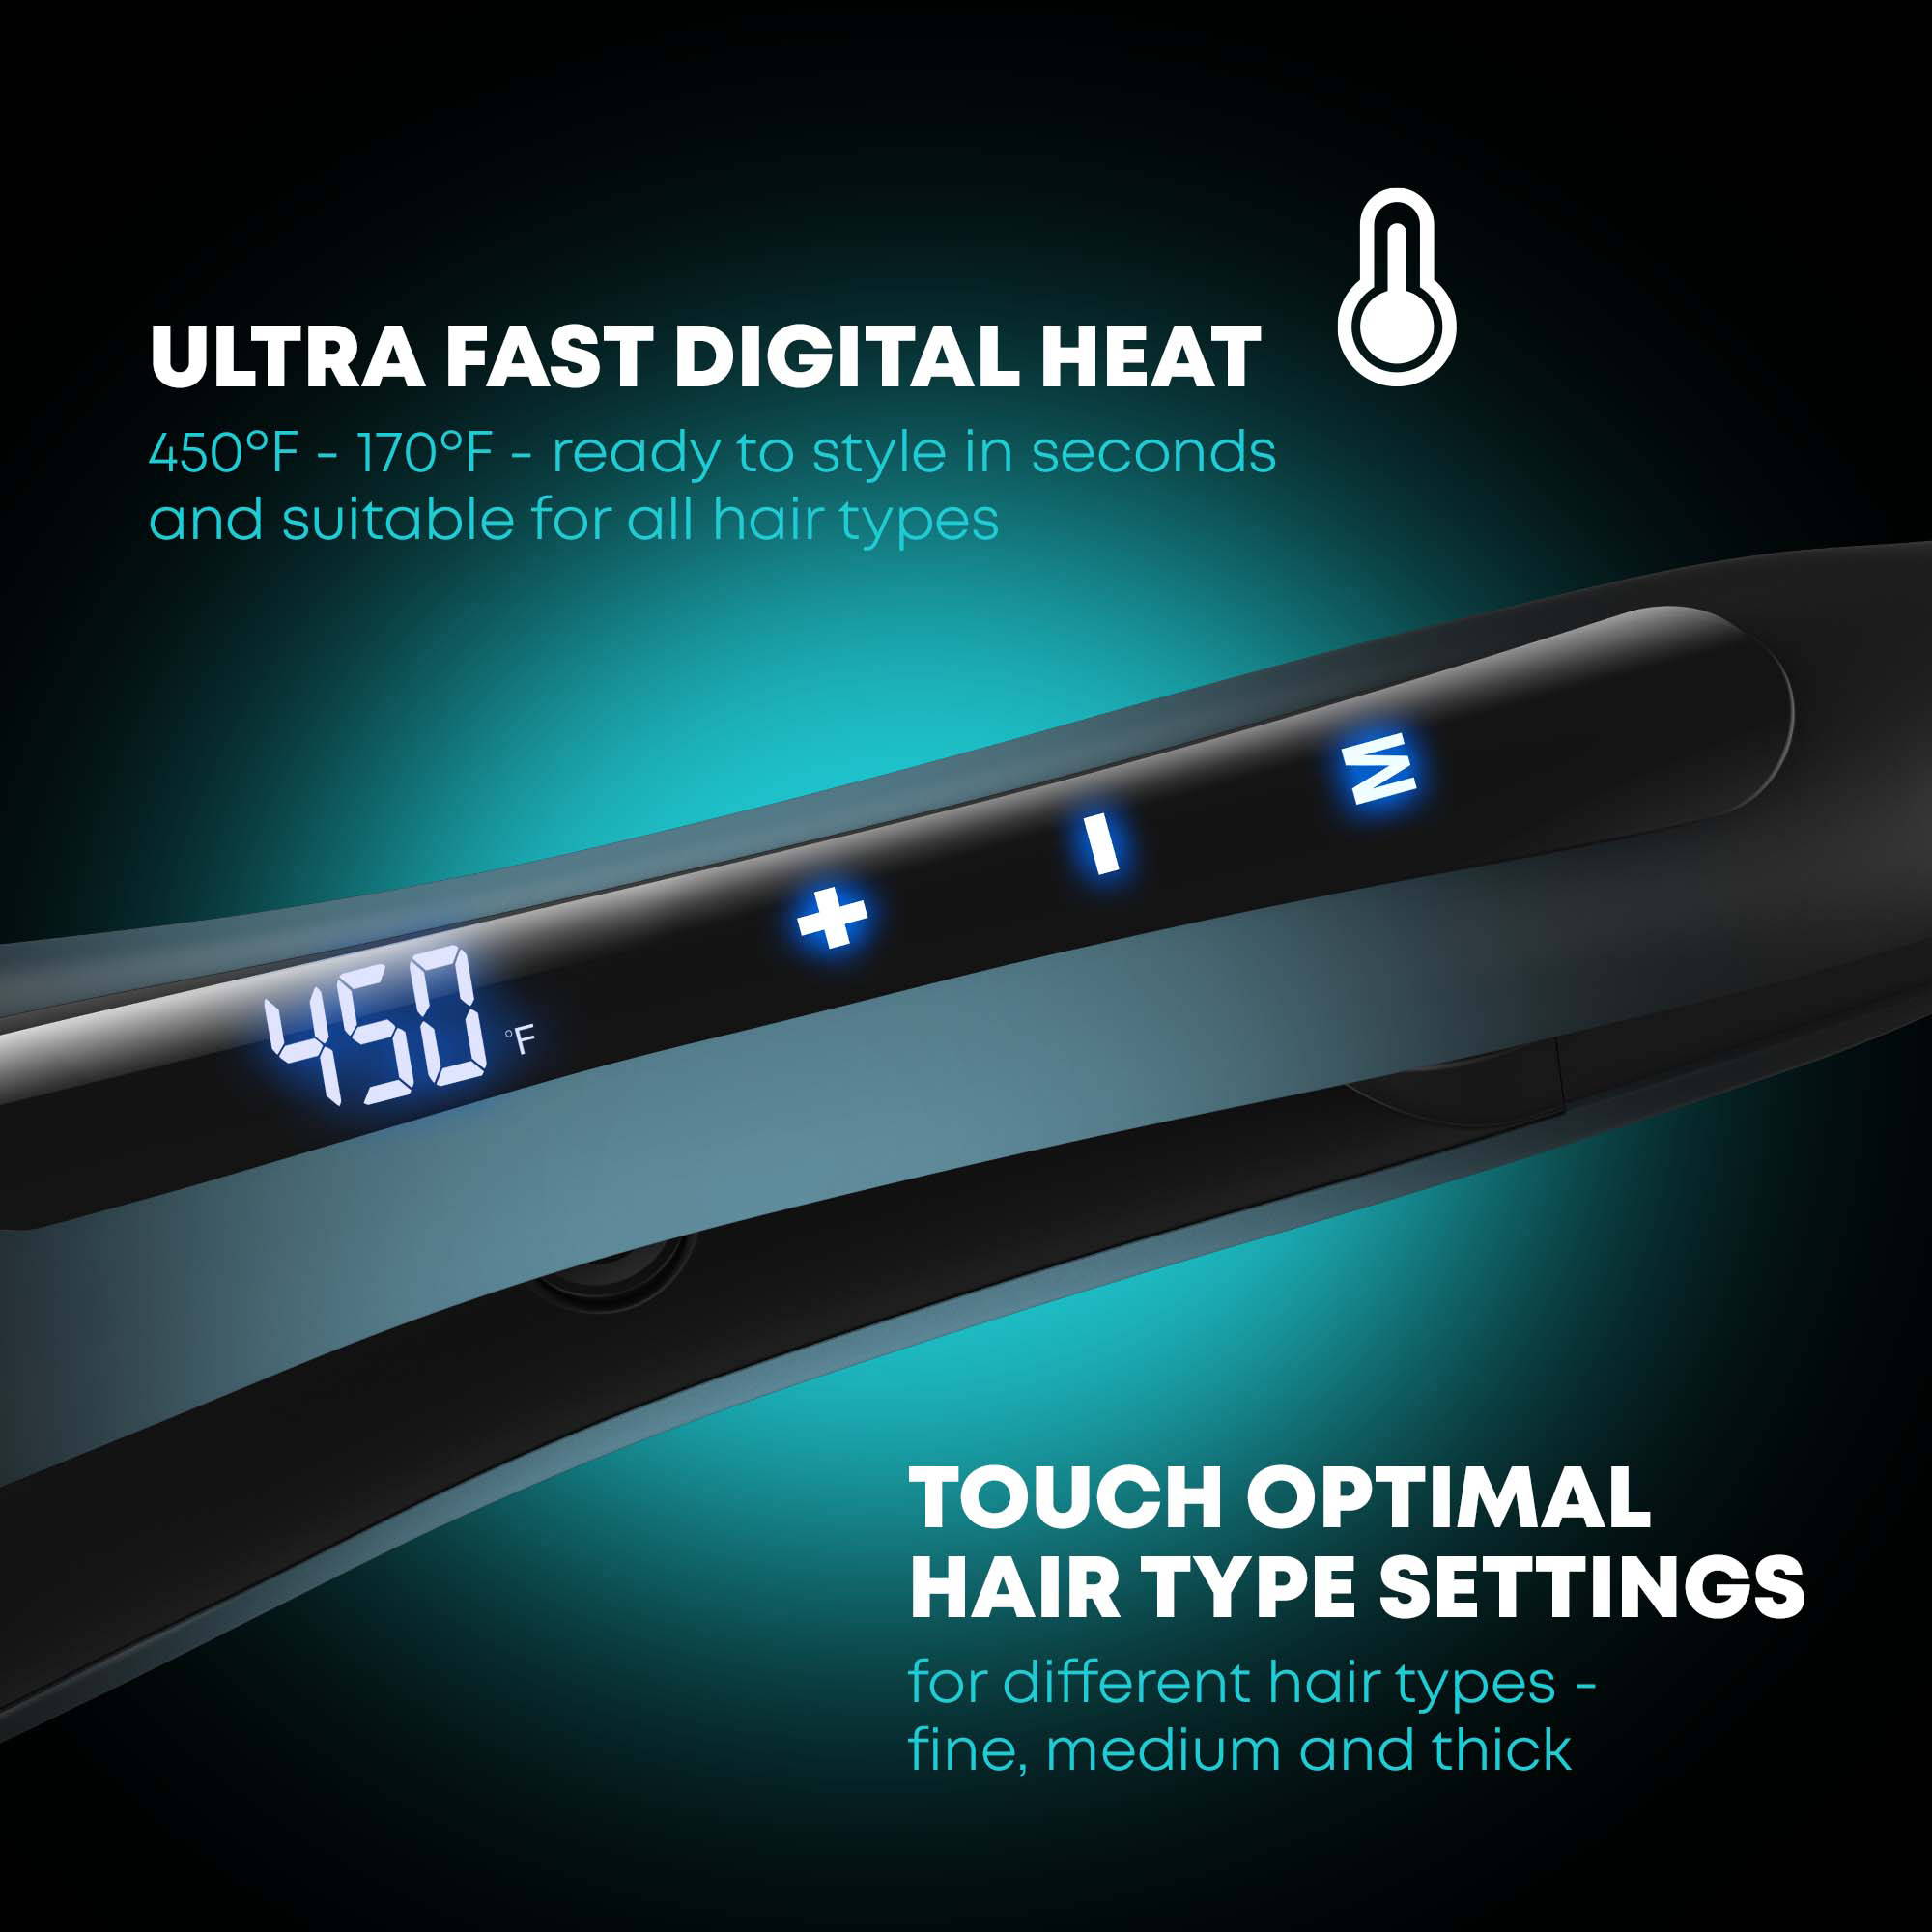 Touch Digital Adjustable Temperature Settings